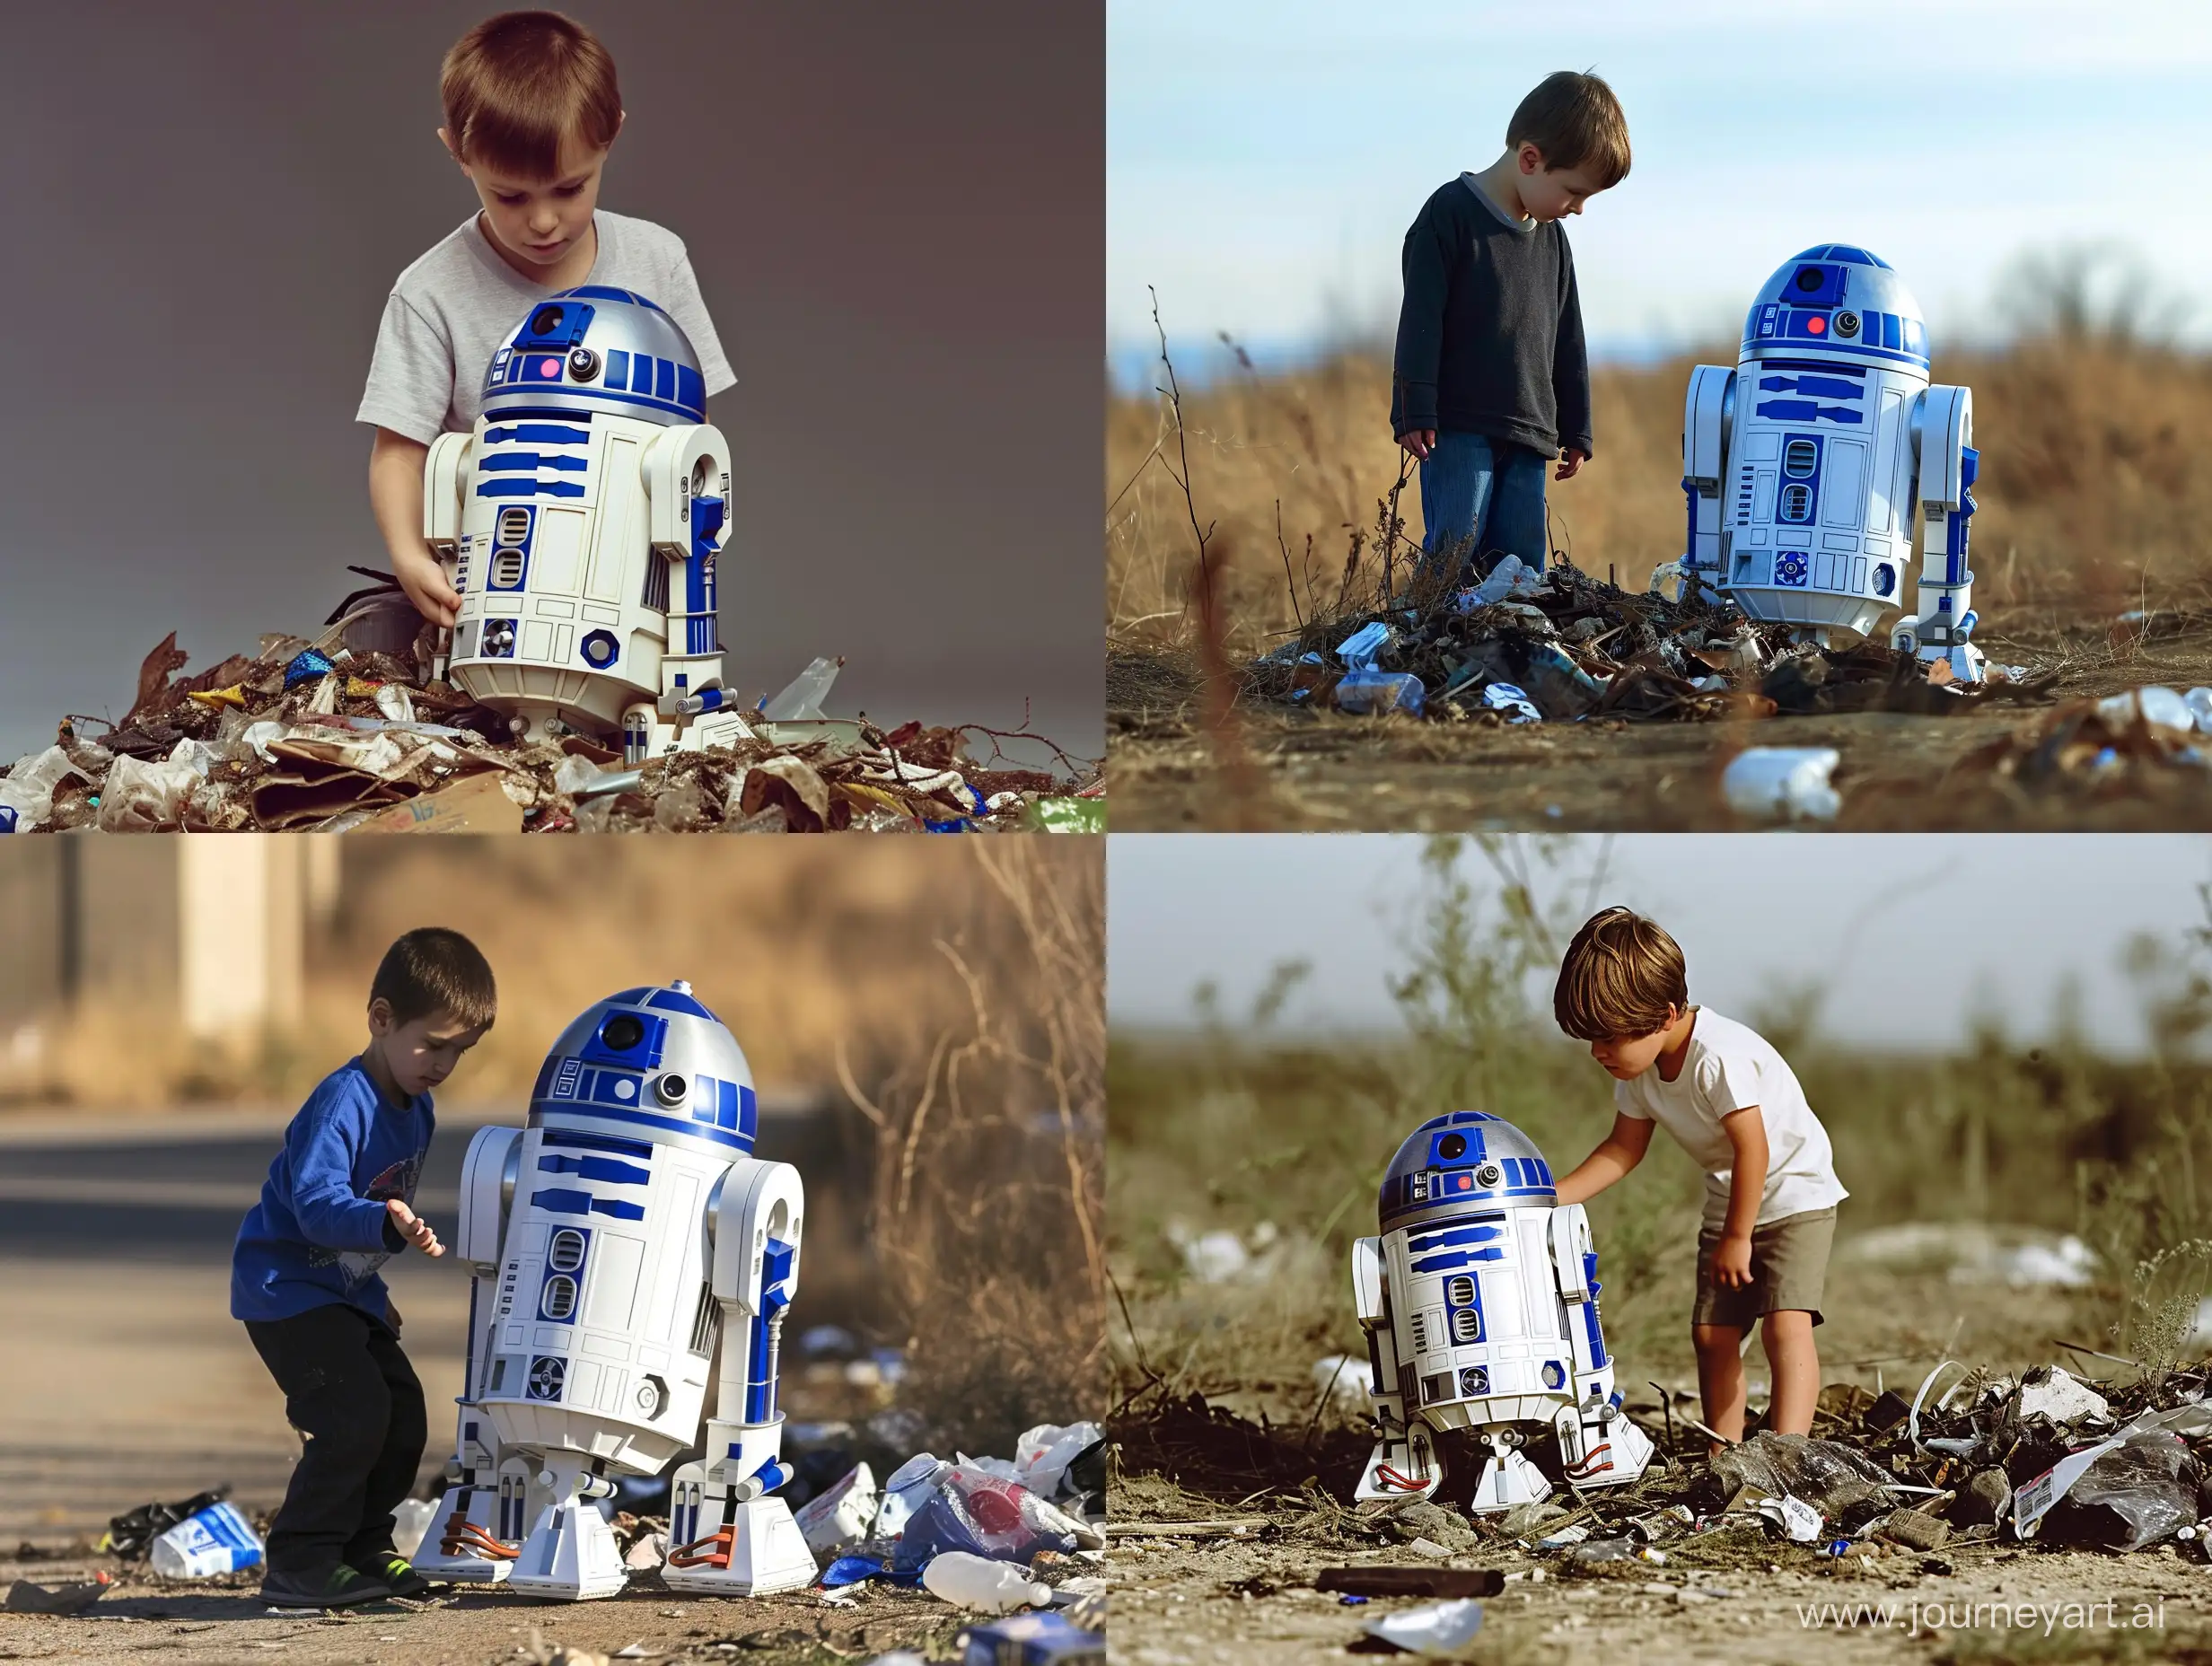 An 8 year old boy finding R2-D2 in a pile of trash